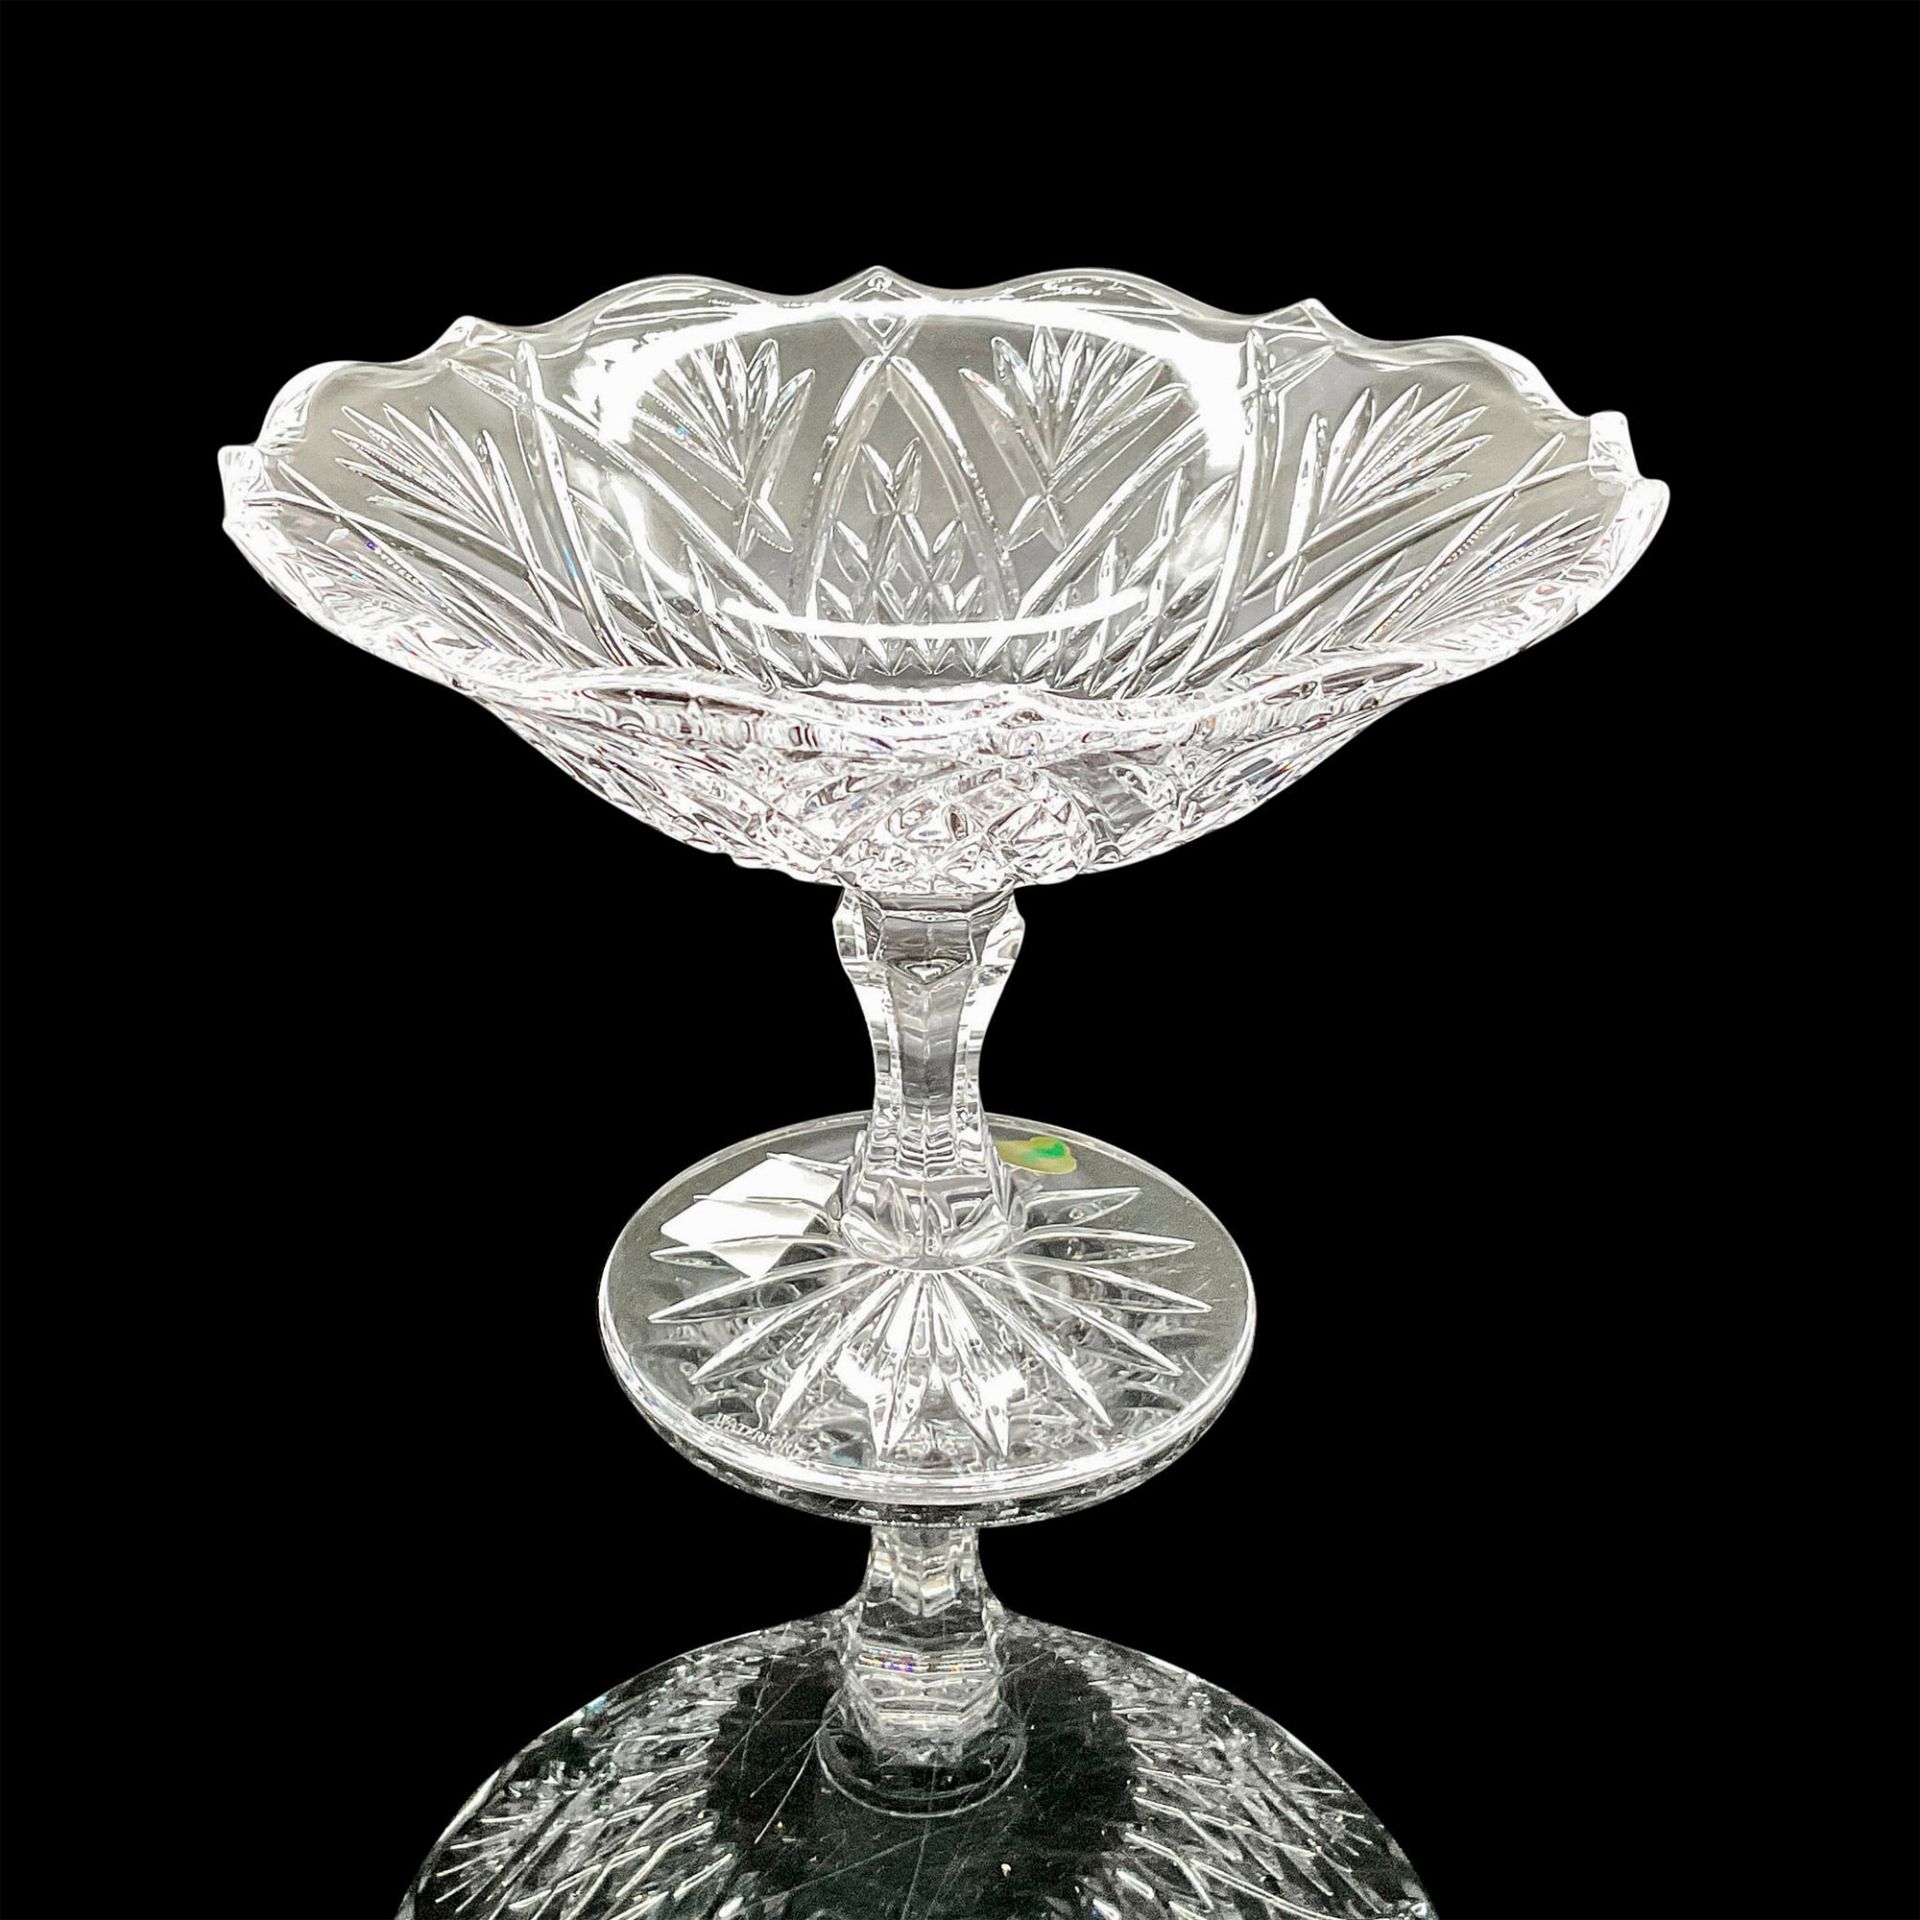 Waterford Crystal Footed Compote Bowl, Dunmore - Image 2 of 4